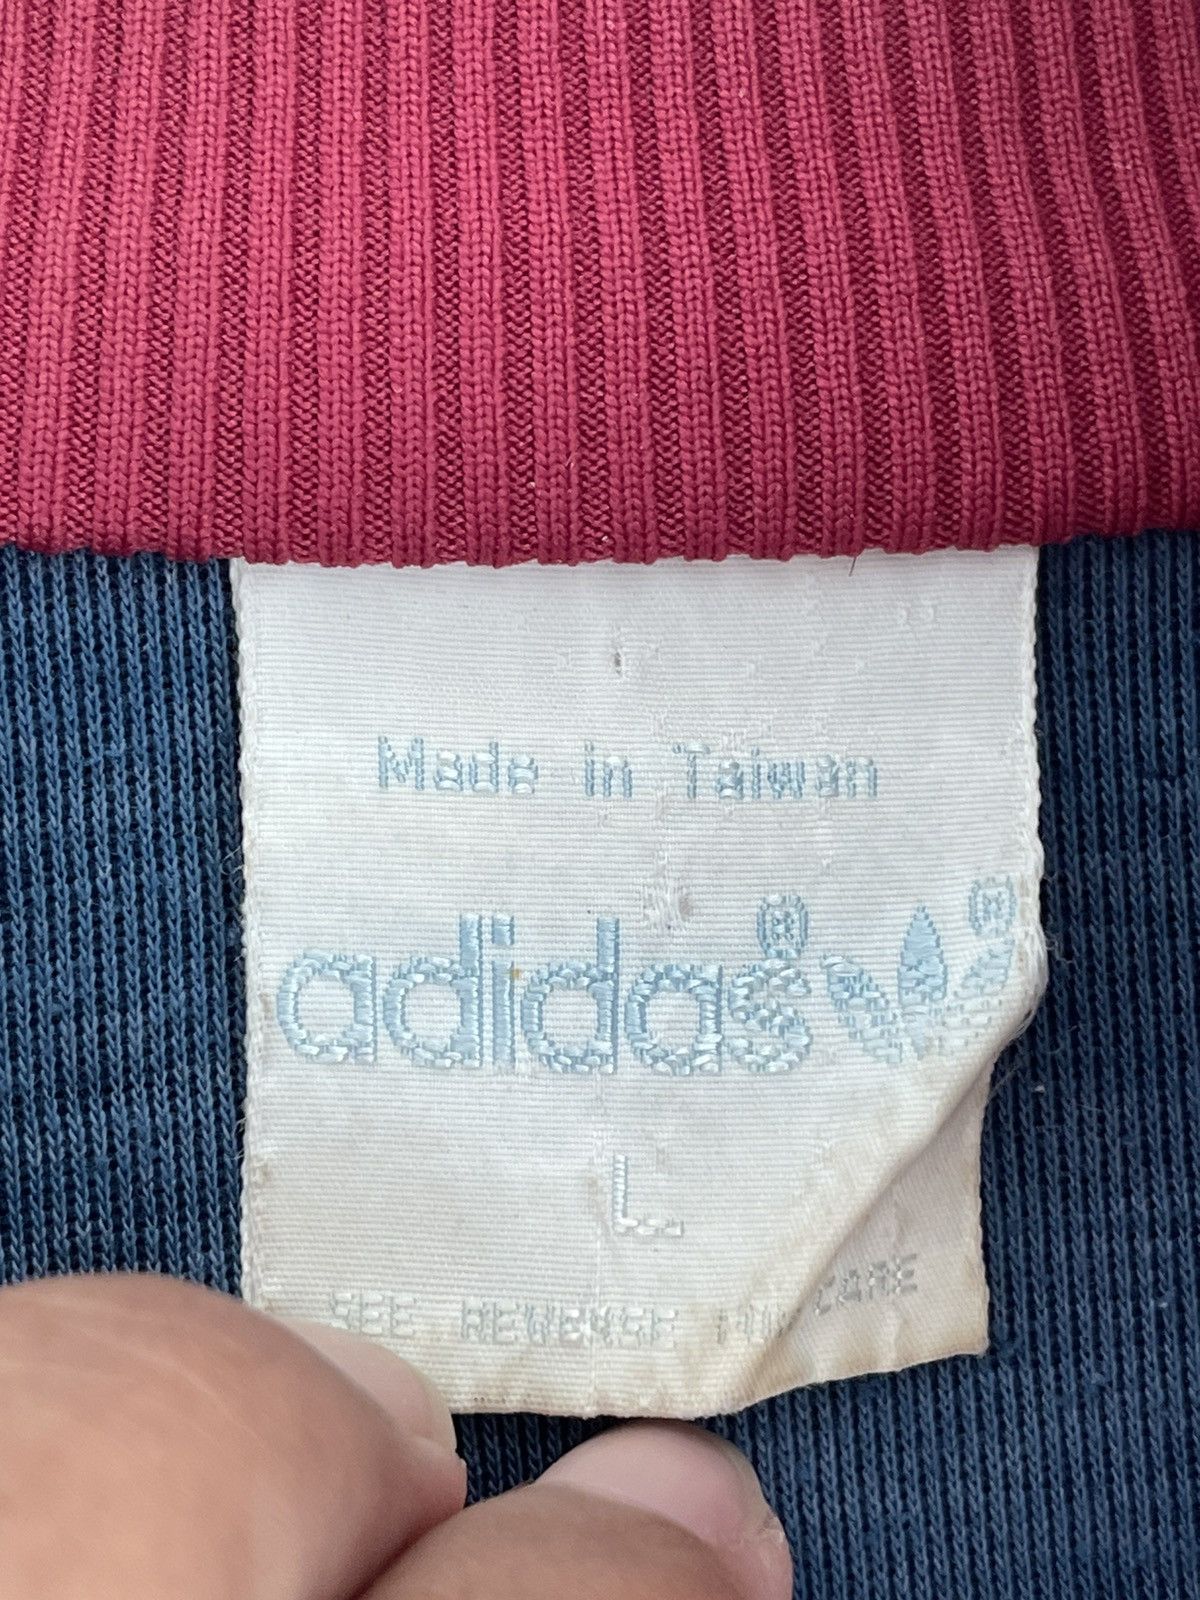 Adidas Vintage Track Top Jacket Made in Taiwan - 3